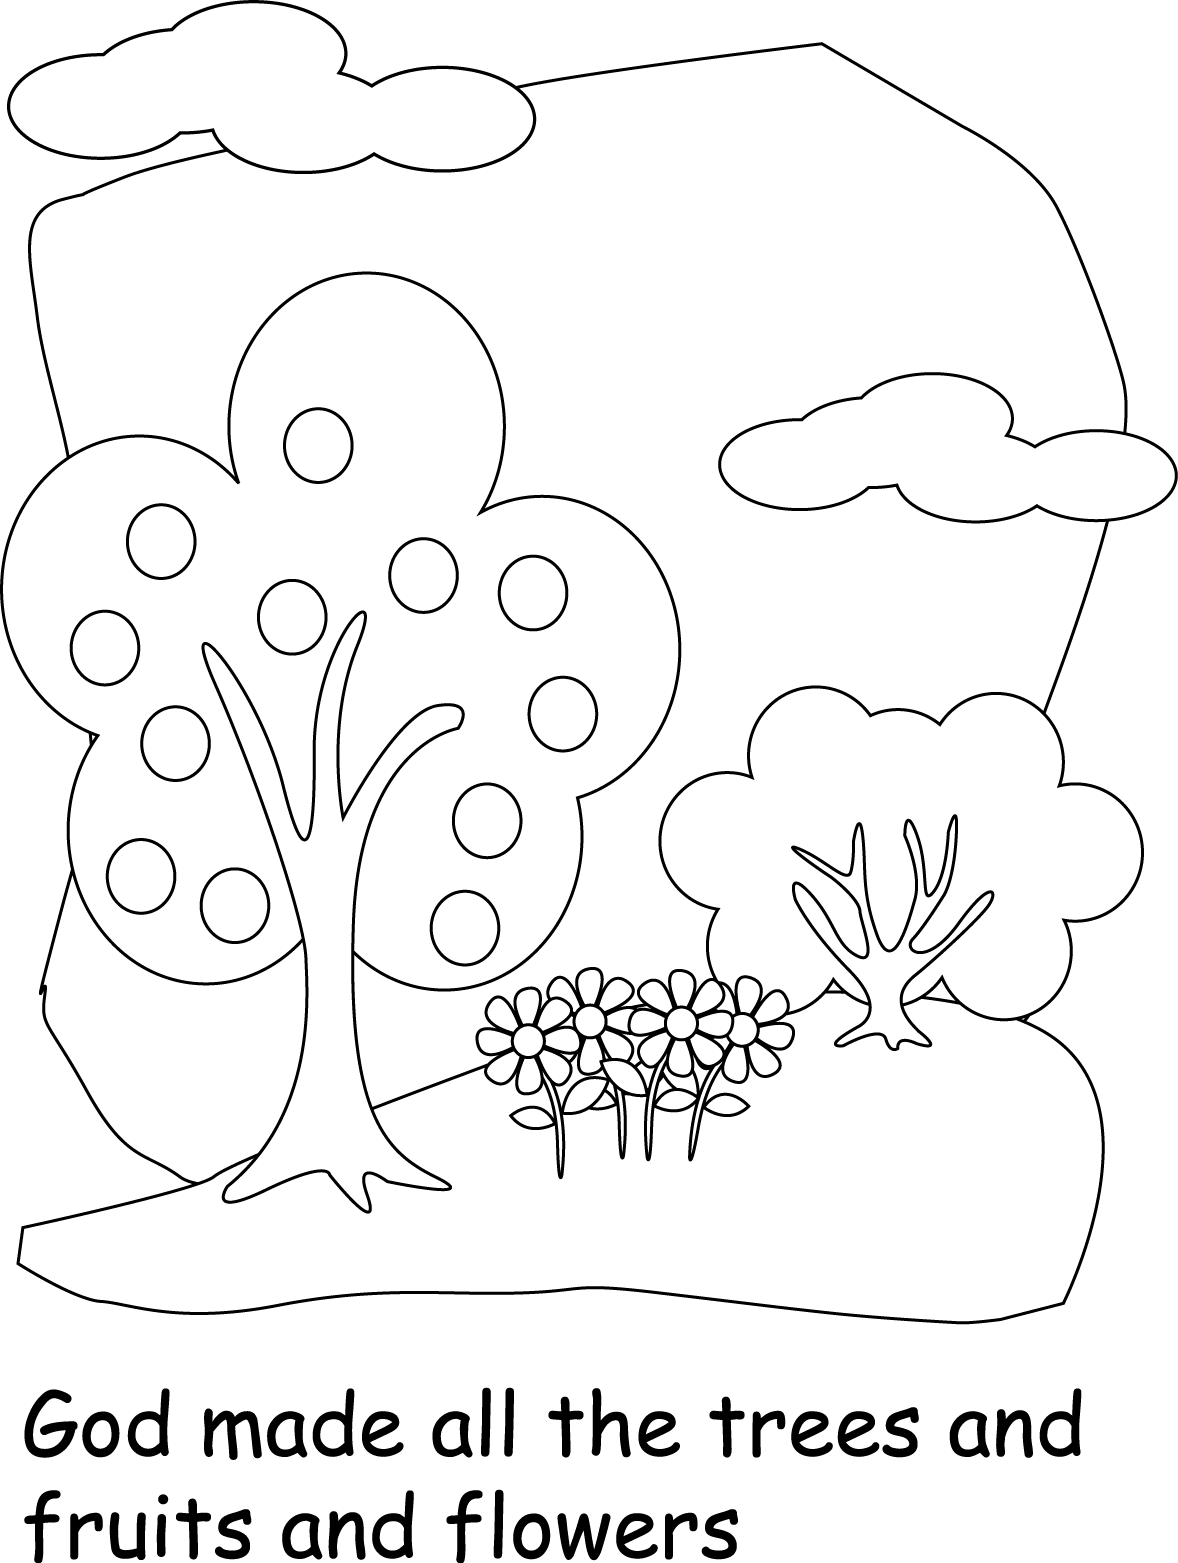 10 Pics of God Loved The World Coloring Pages - Printable Coloring ...